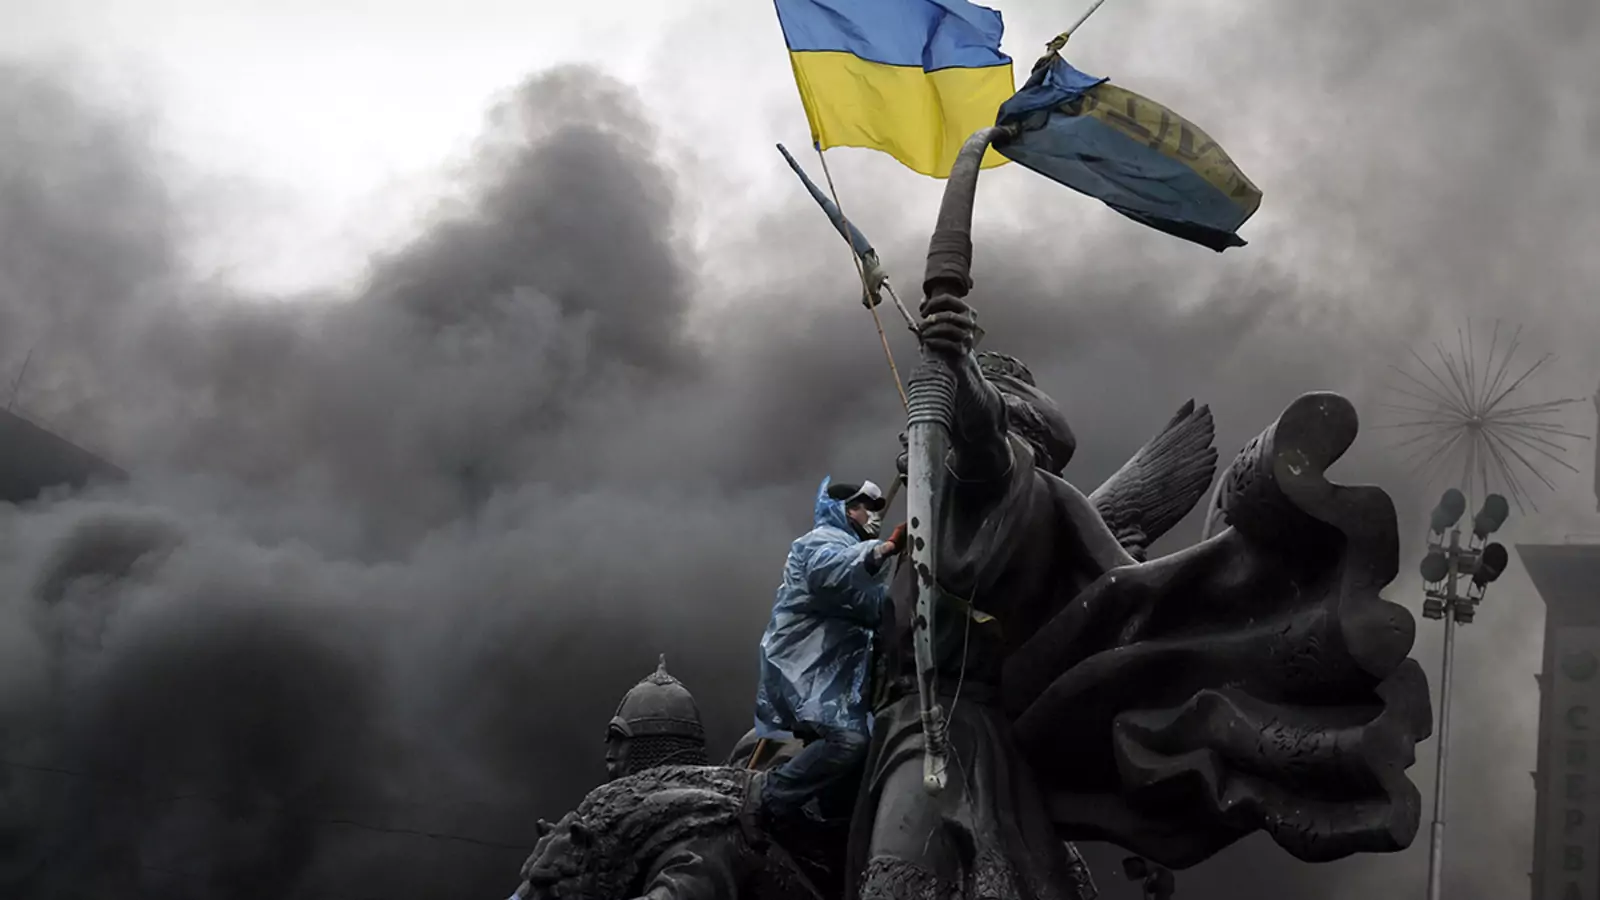 ukraine: conflict at the crossroads of europe and russia | council on foreign relations